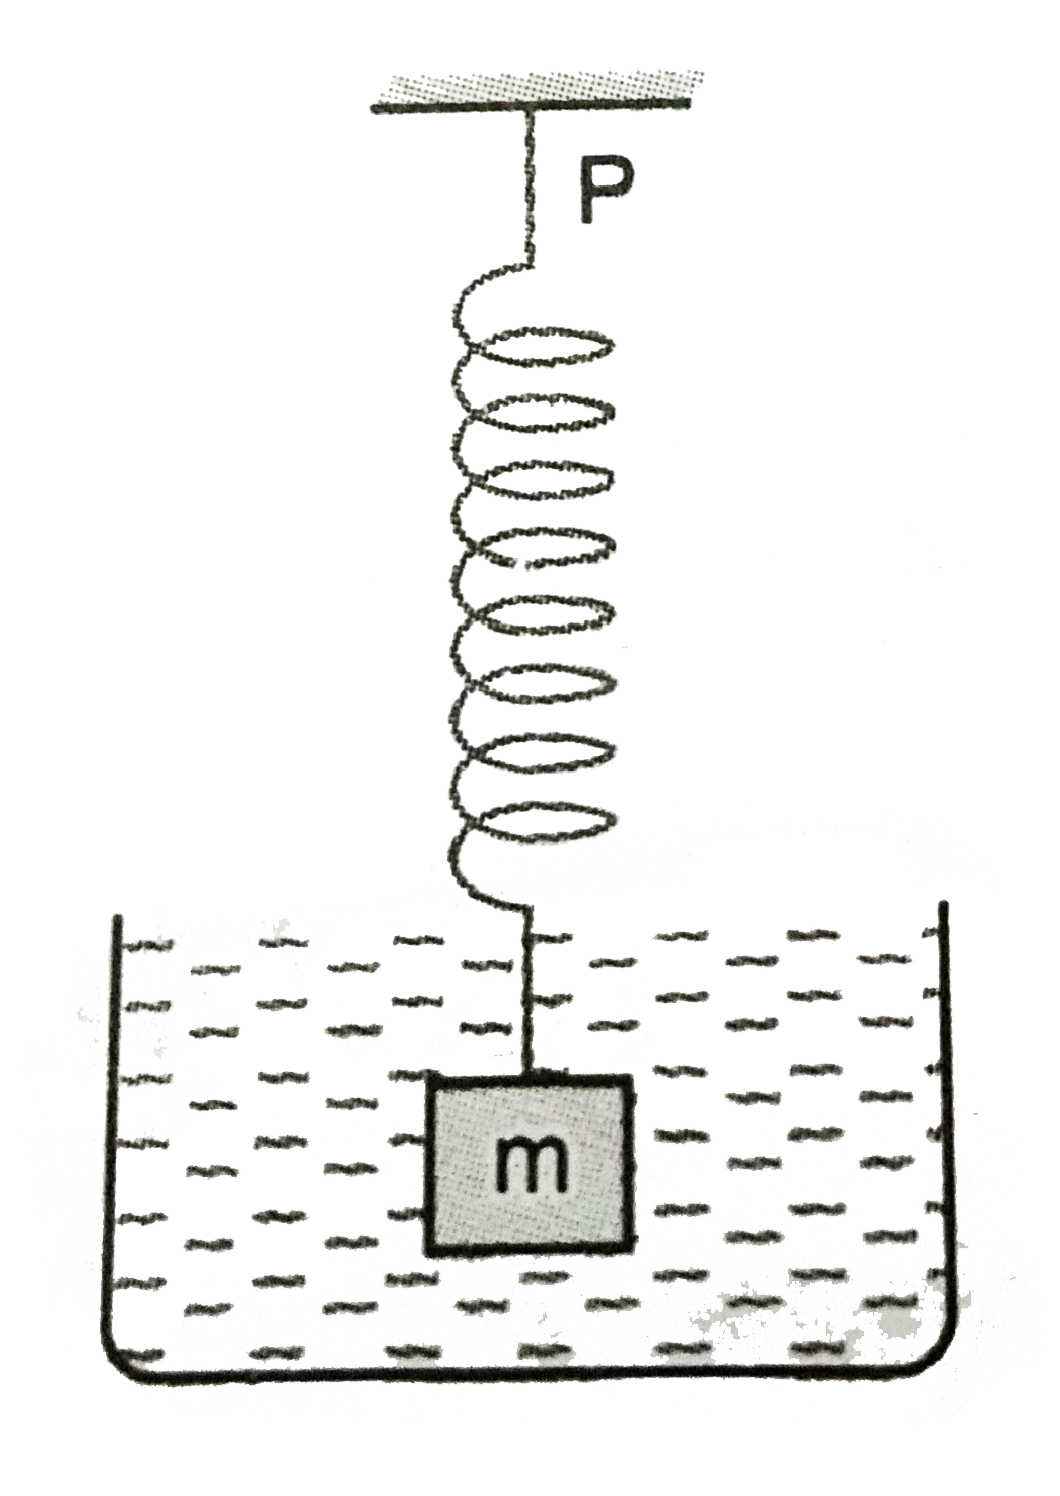 A cube of mass m and densituy D is suspended from the point P by a spring of stiffness k,   The system is kept inside a beaker filled with a liquid of density d, where D gt d. What is the elongation in the spring ?